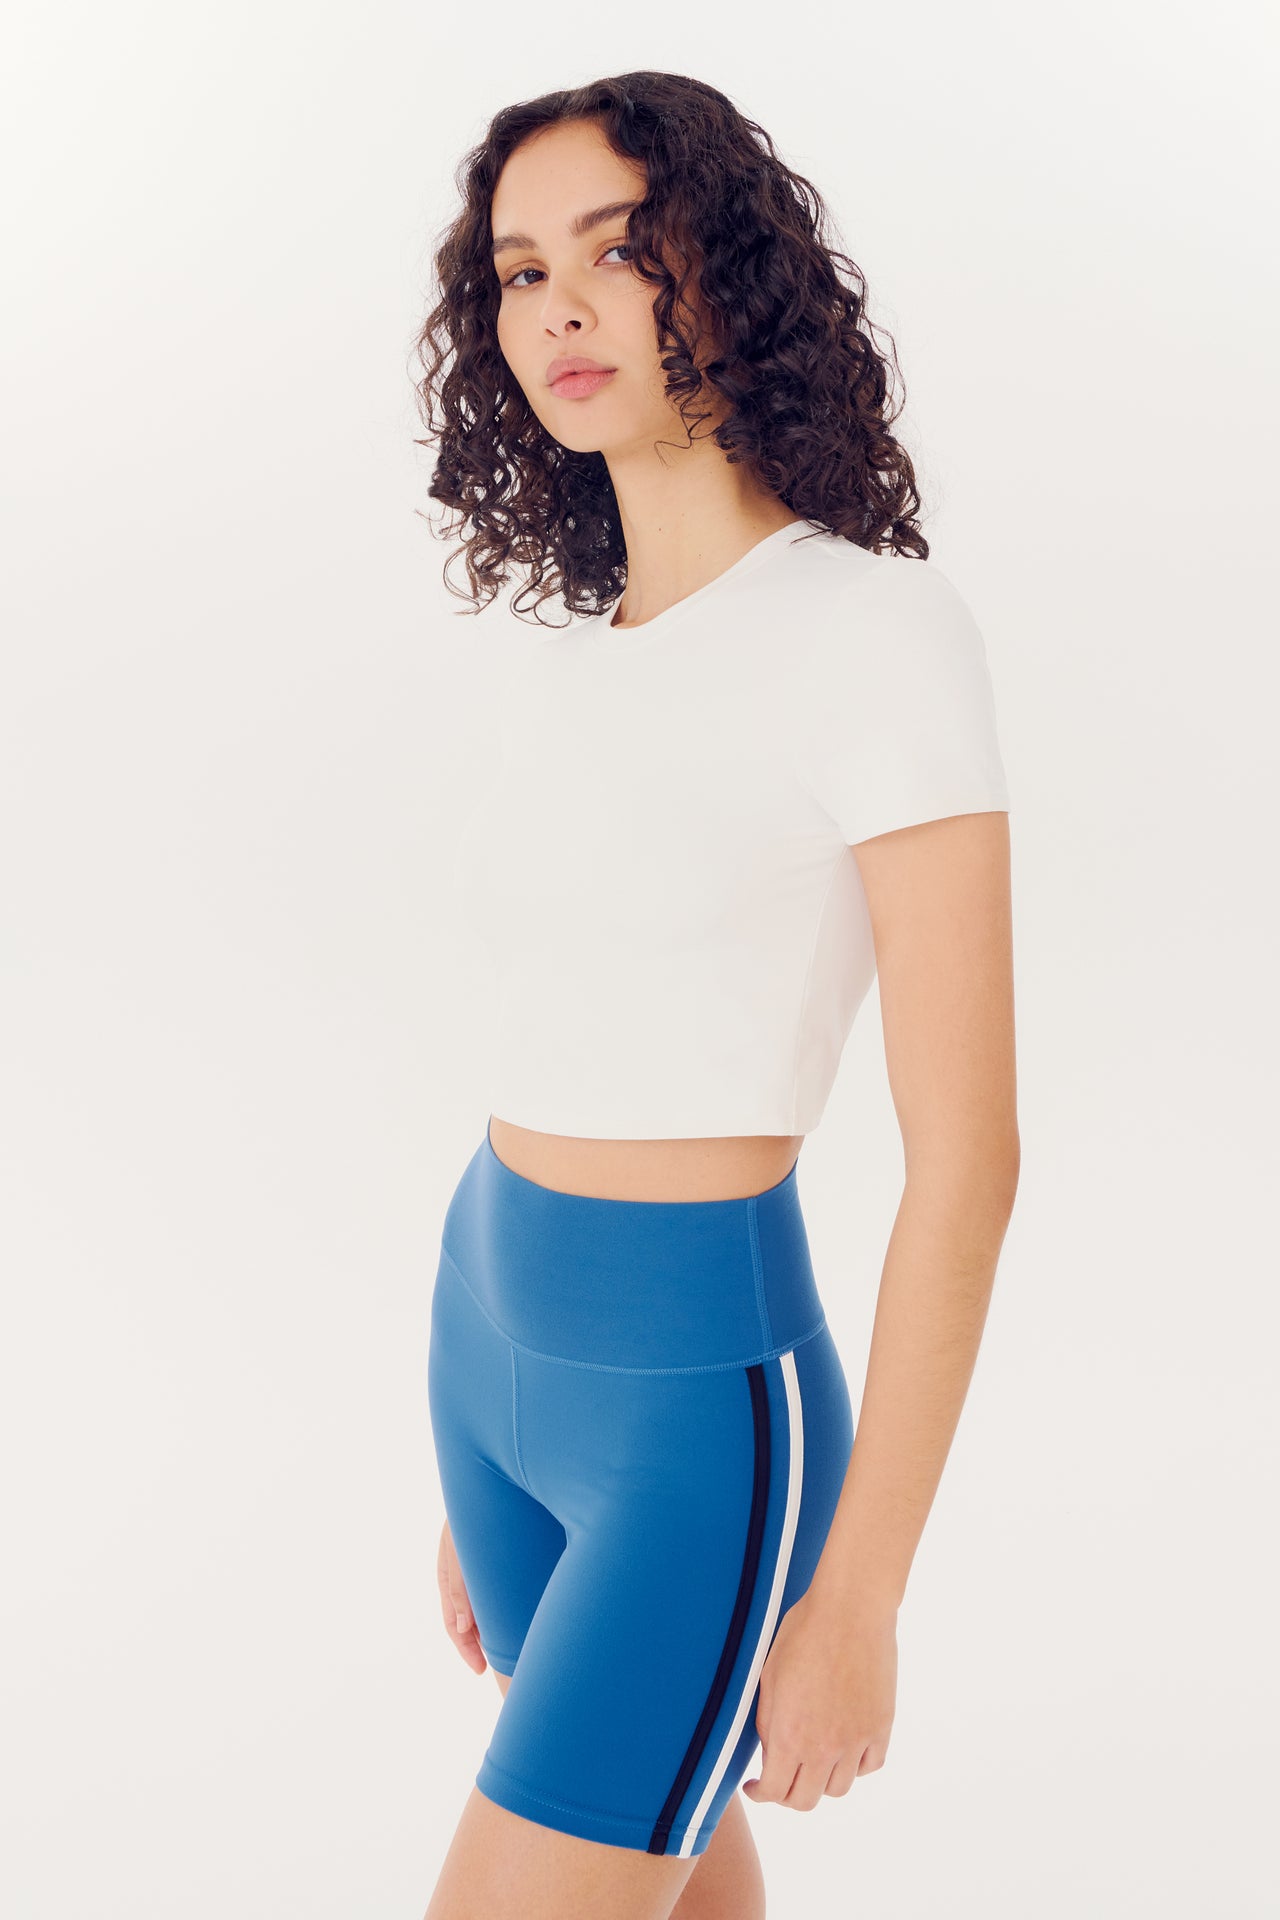 A woman in a SPLITS59 white Airweight S/S Crop top and blue nylon athletic shorts with a white stripe poses against a white background.